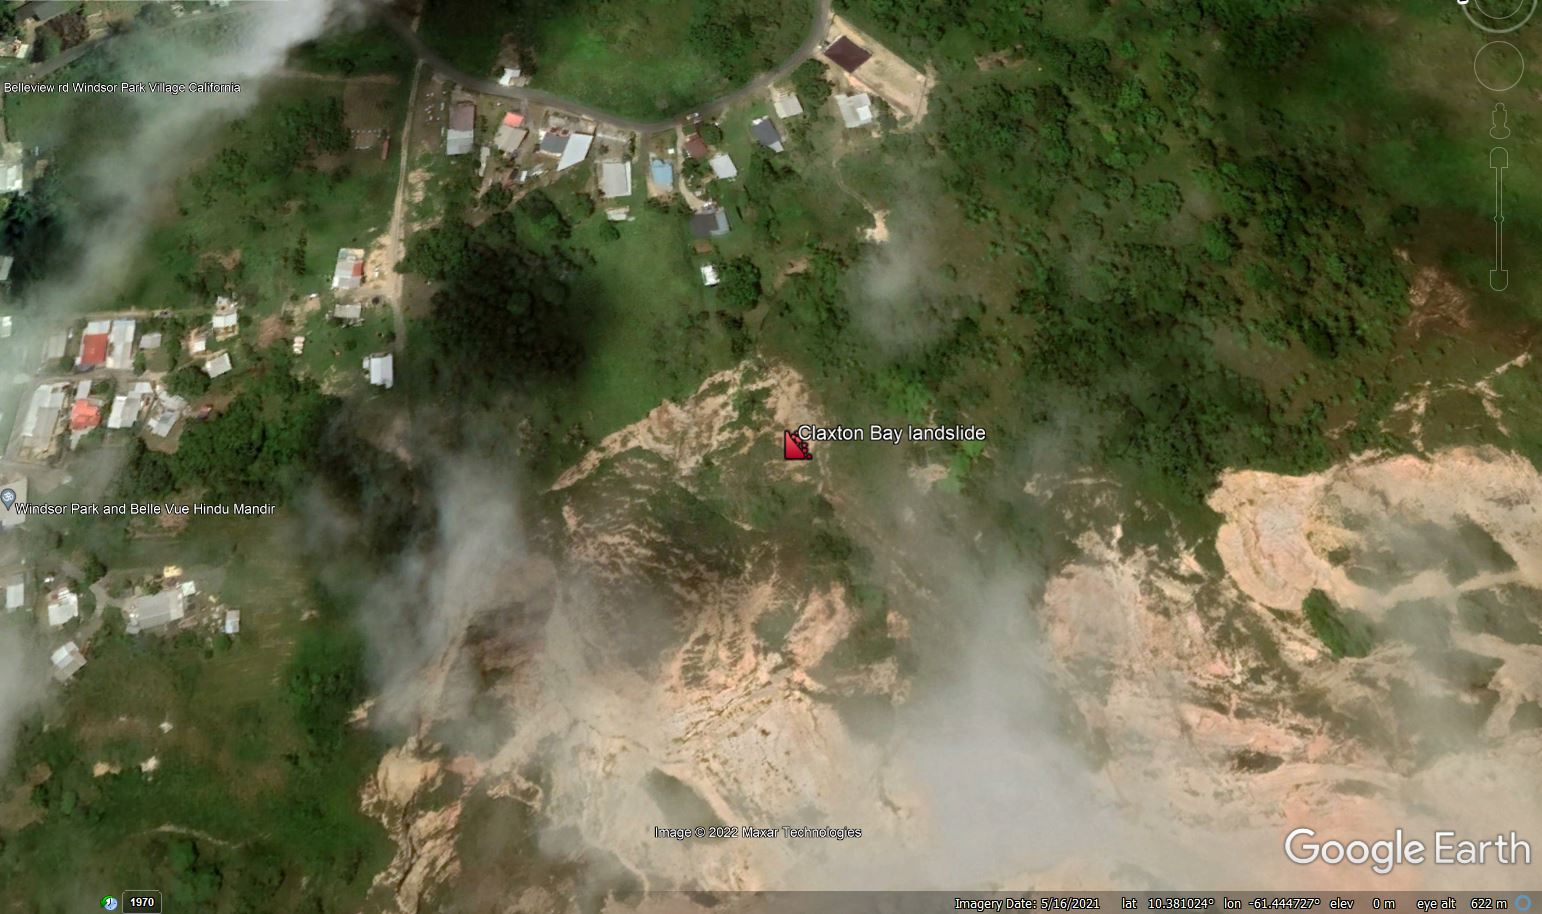 Zoomed in Google Earth image of the site of the Claxton Bay landslide in Trinidad, collected in May 2021.